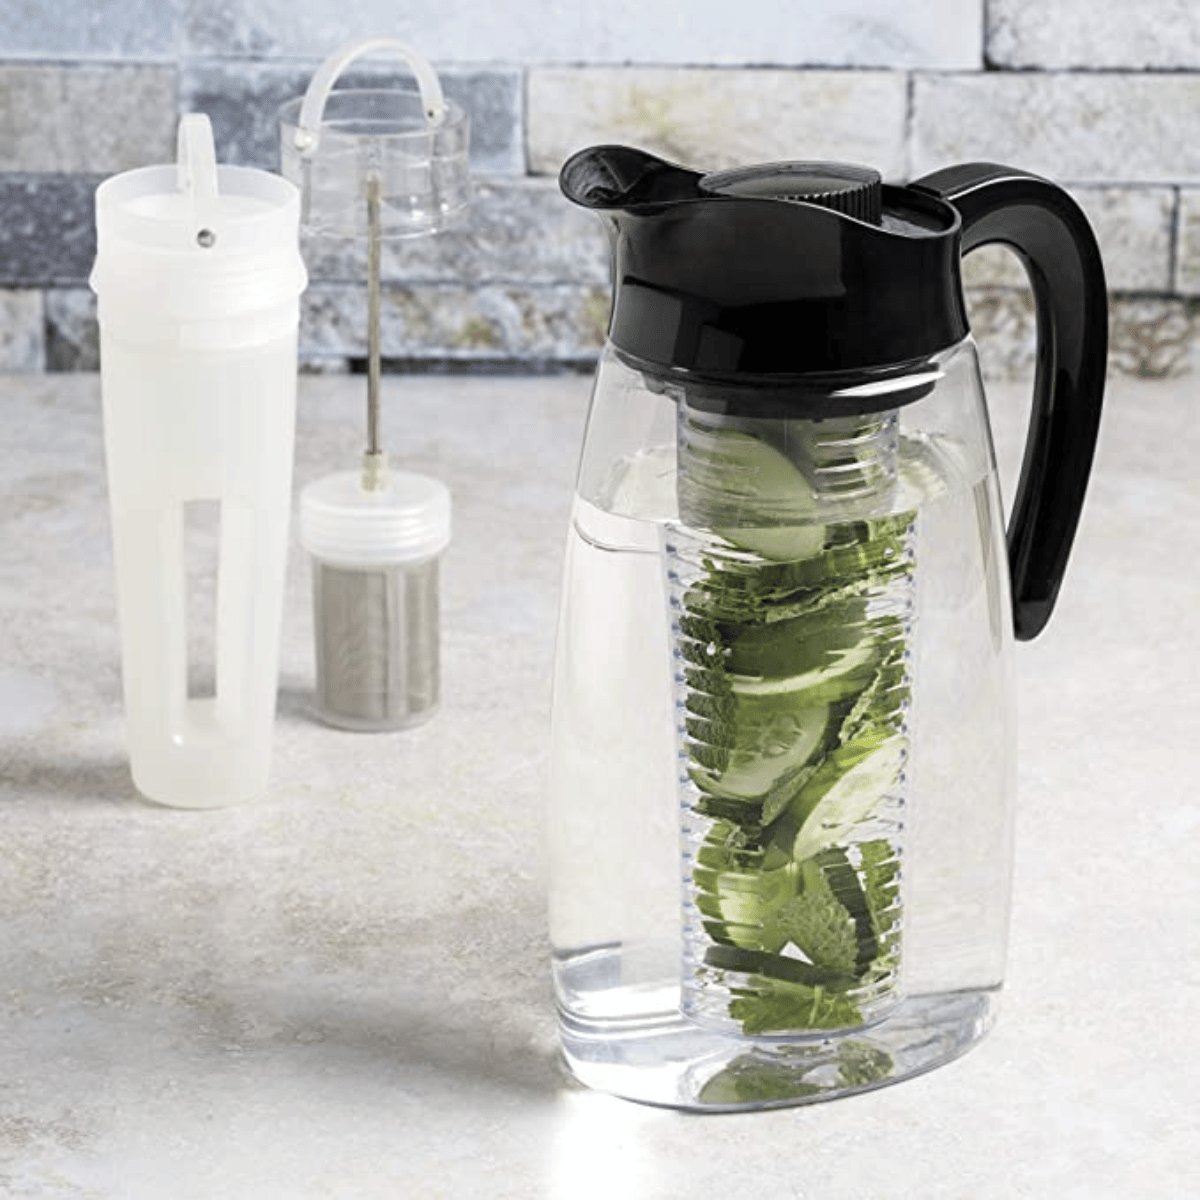 Best Water Infuser Pitchers: Primula